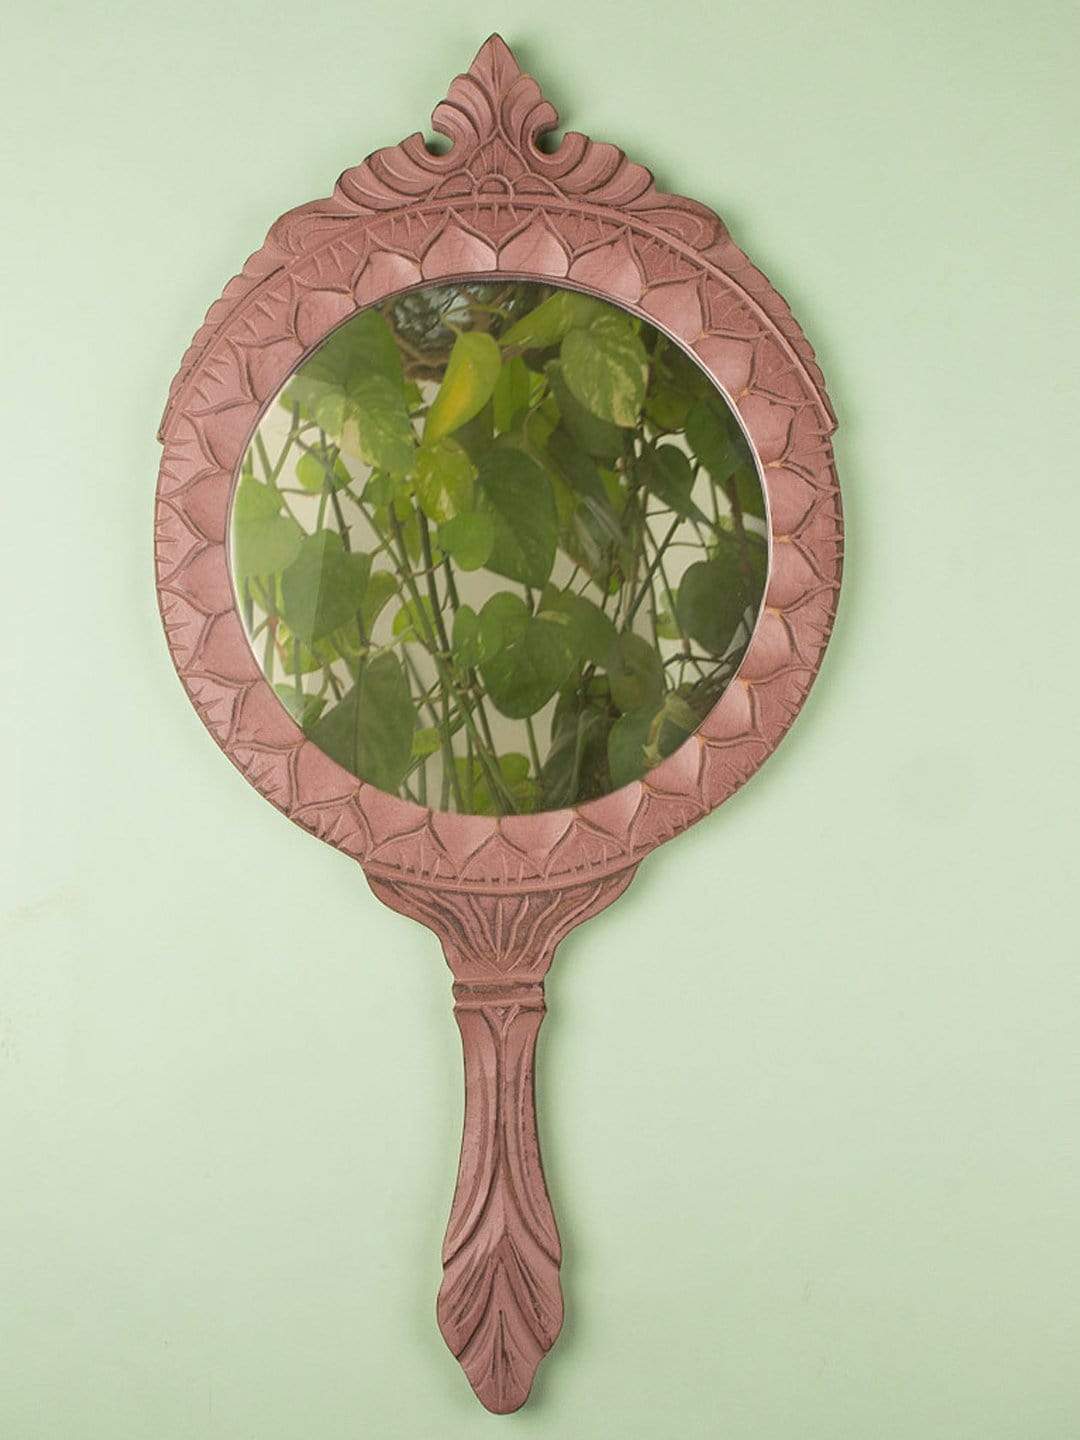 Wisteria Wall MirrorFrequently Asked Questions about this product:
Q. Where can I put this? 
A. You can plop this into any space that could use a soft touch, and marvel as your 'once' lWisteria Wall MirrorThe Wishing Chair